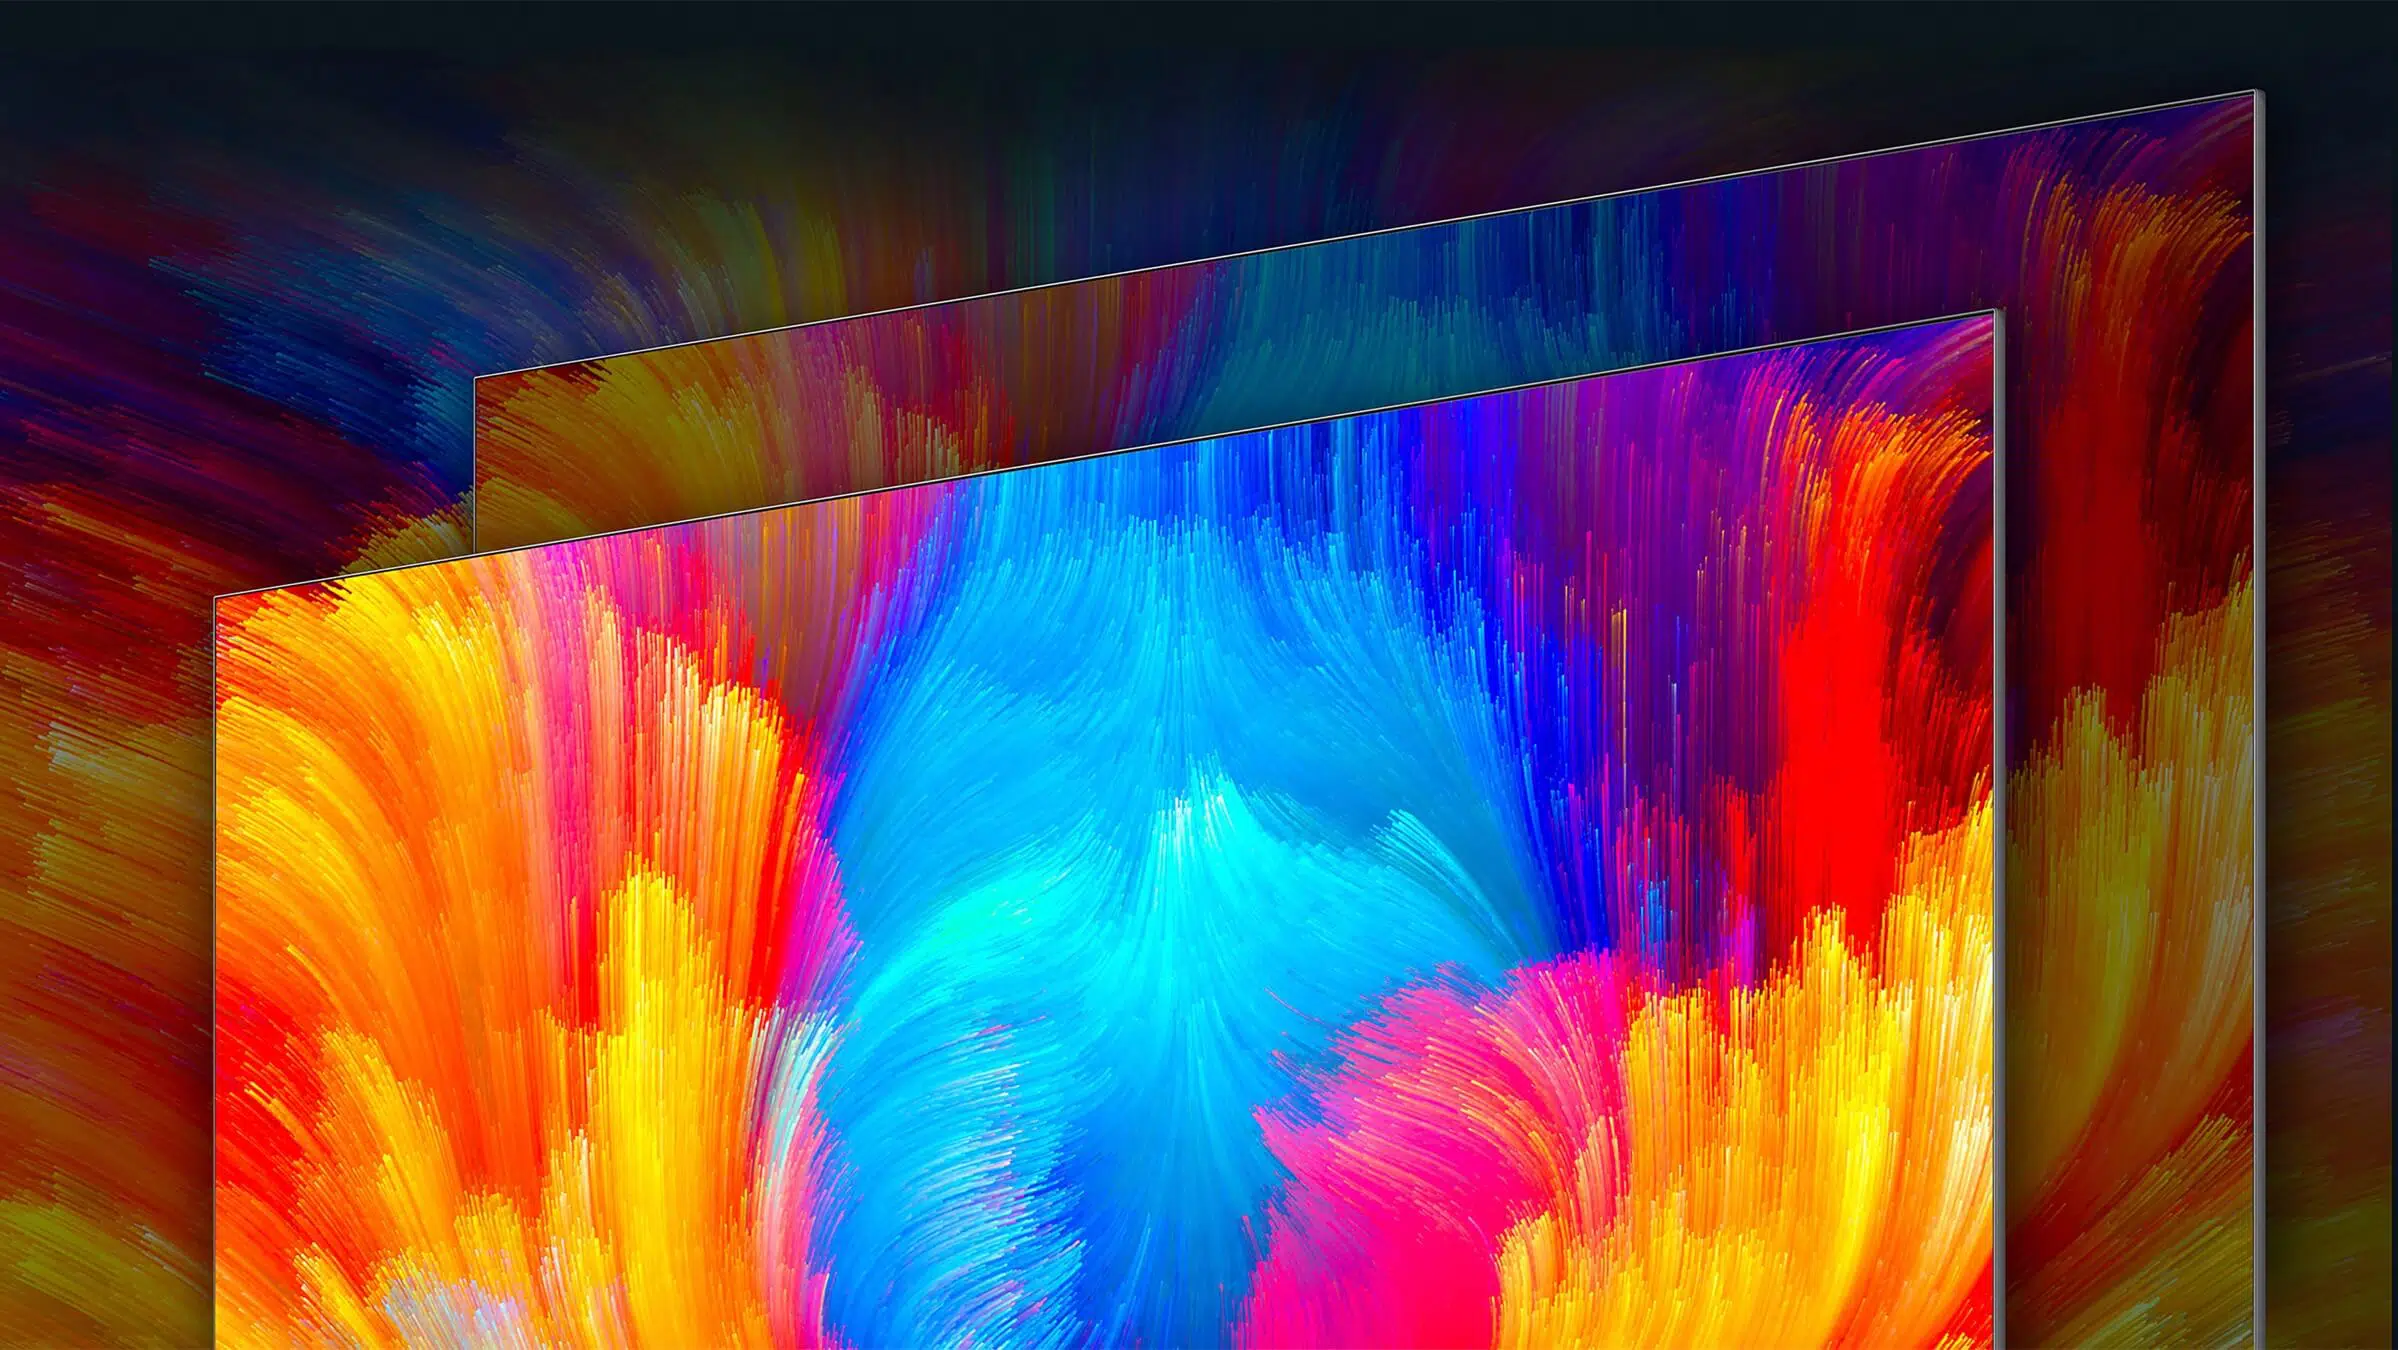 An image showcasing a wide range of vibrant colors, similar to looking through a kaleidoscope, representing the TV's ability to illustrate a wider palette of colors with up to 90% gamut coverage under the DCI-P3 standard.